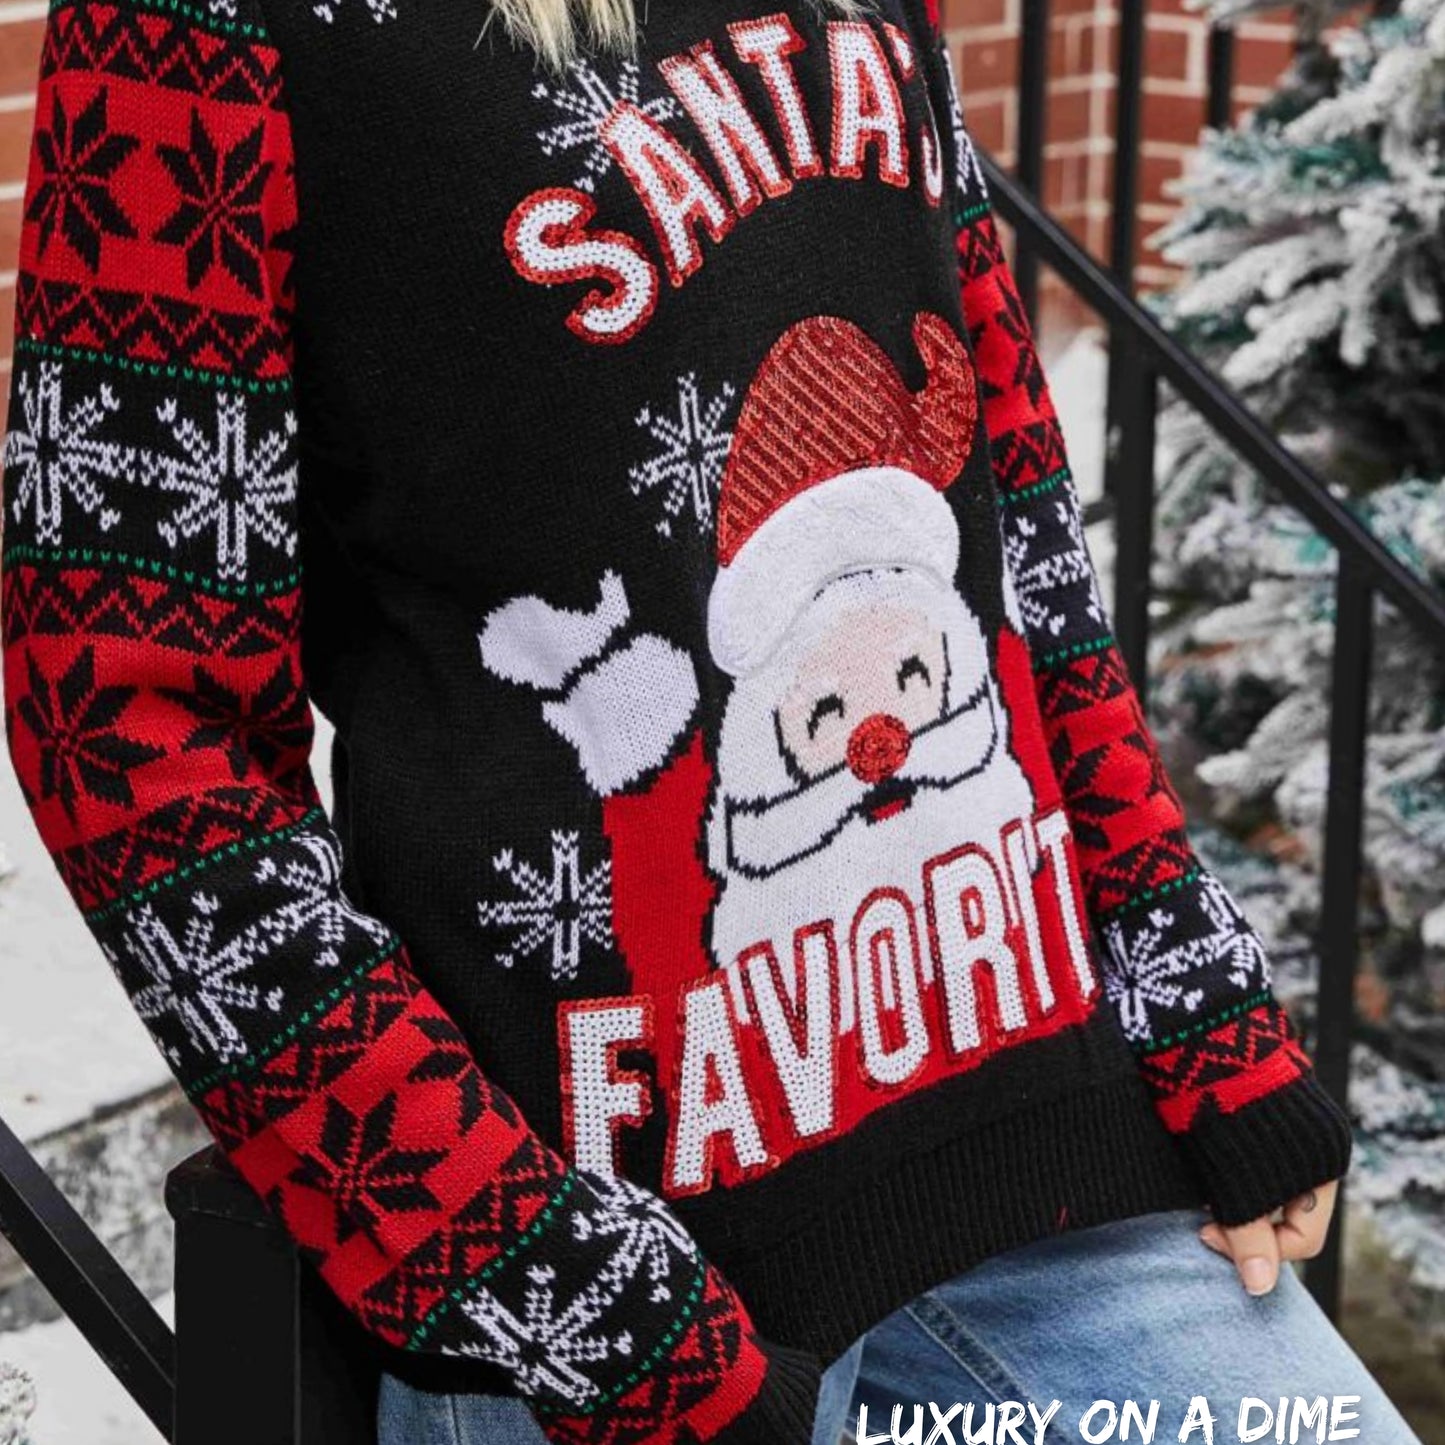 Sequin Santa's Favorite Knit Fun Round Neck Glam Holiday Sweater Top